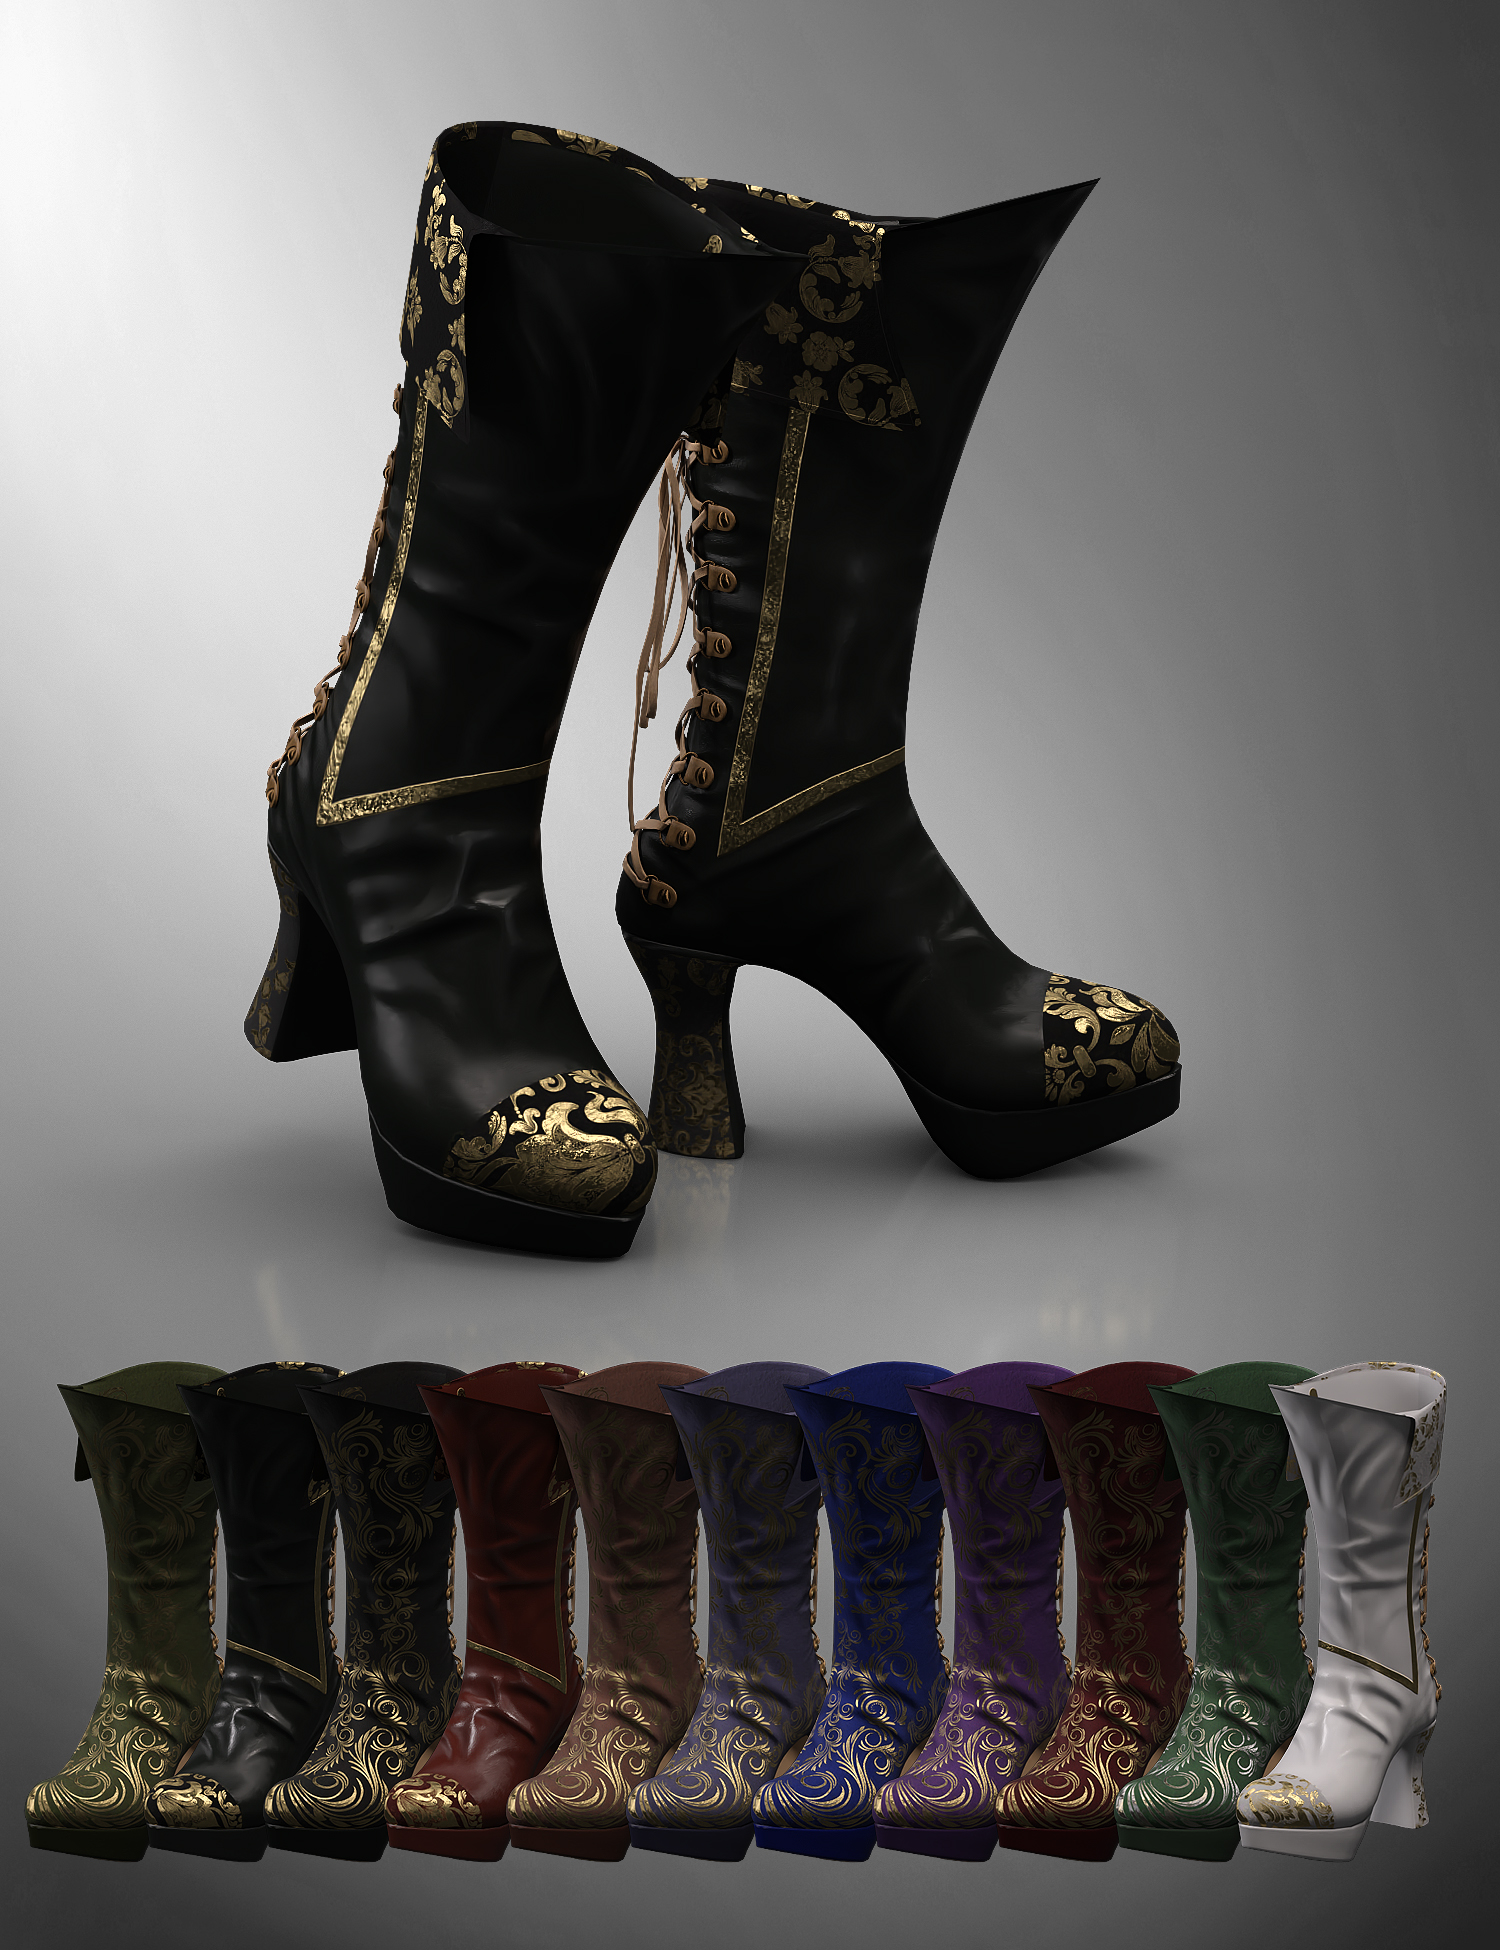 Victorian Vampire Boots for Genesis 8 and 8.1 Females